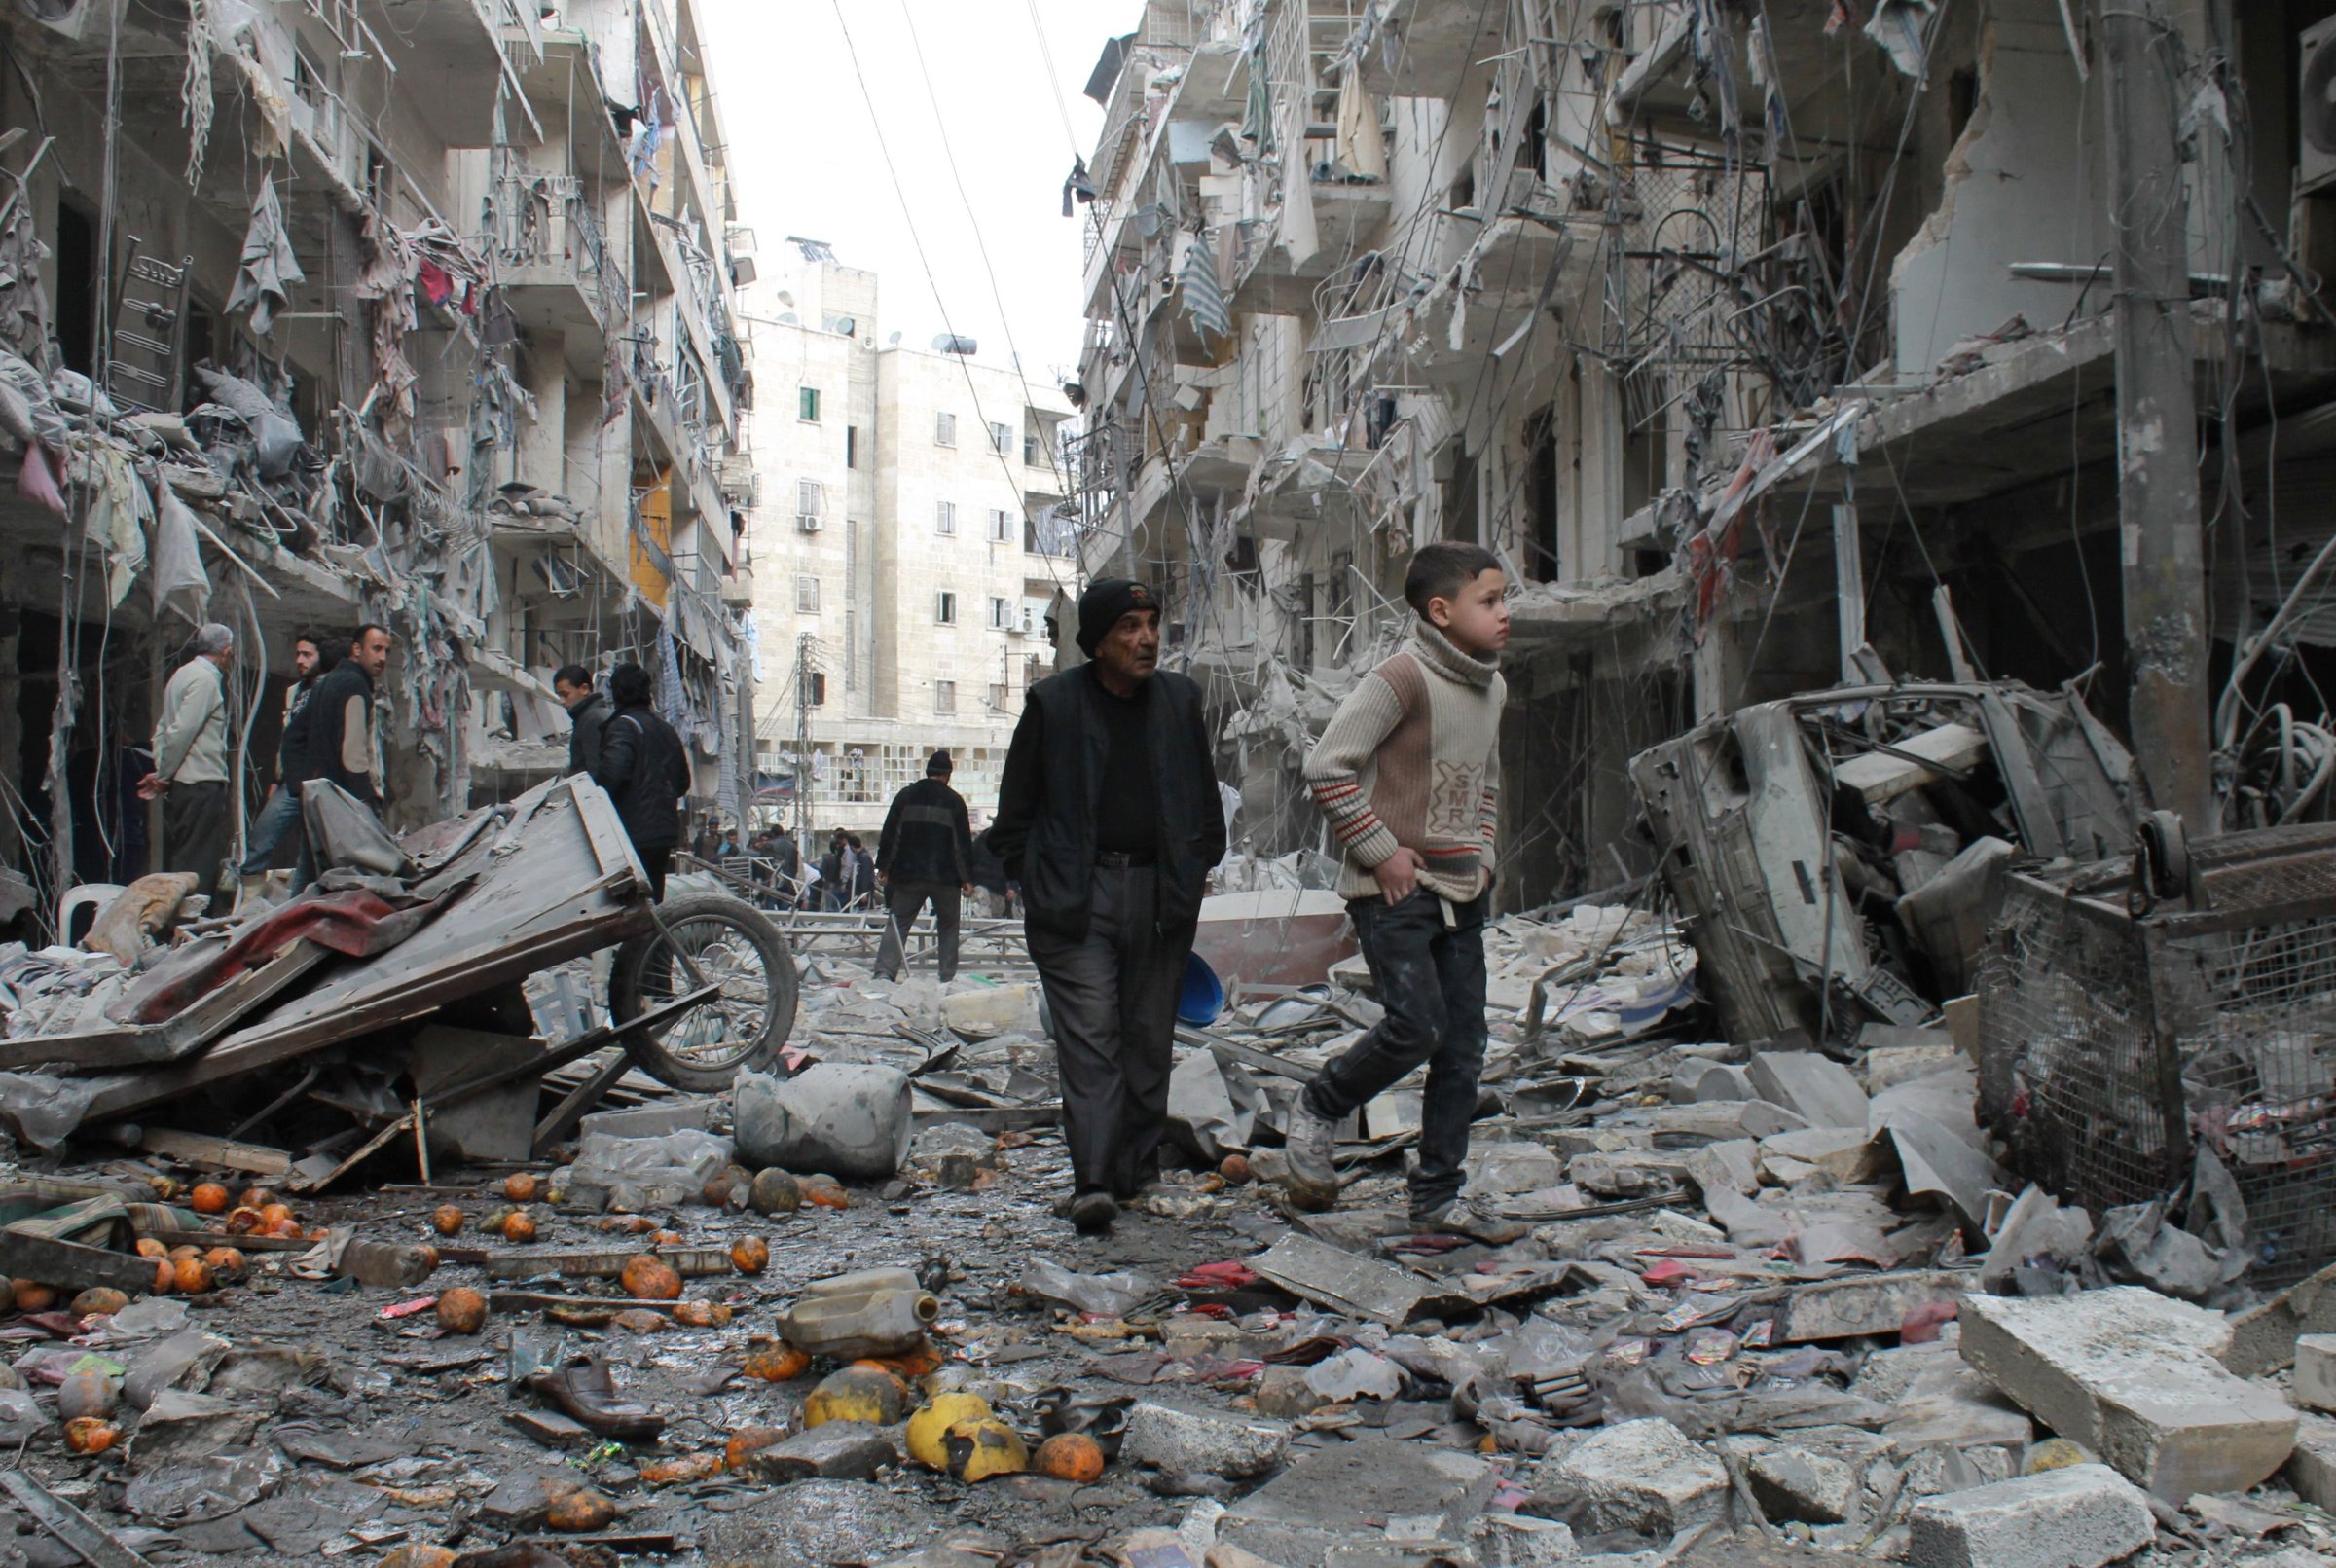 An elderly Syrian man and a child walk amidst debris in a residential block reportedly hit by an explosives-filled barrel dropped by a government forces helicopter on March 18, 2014 in Aleppo.